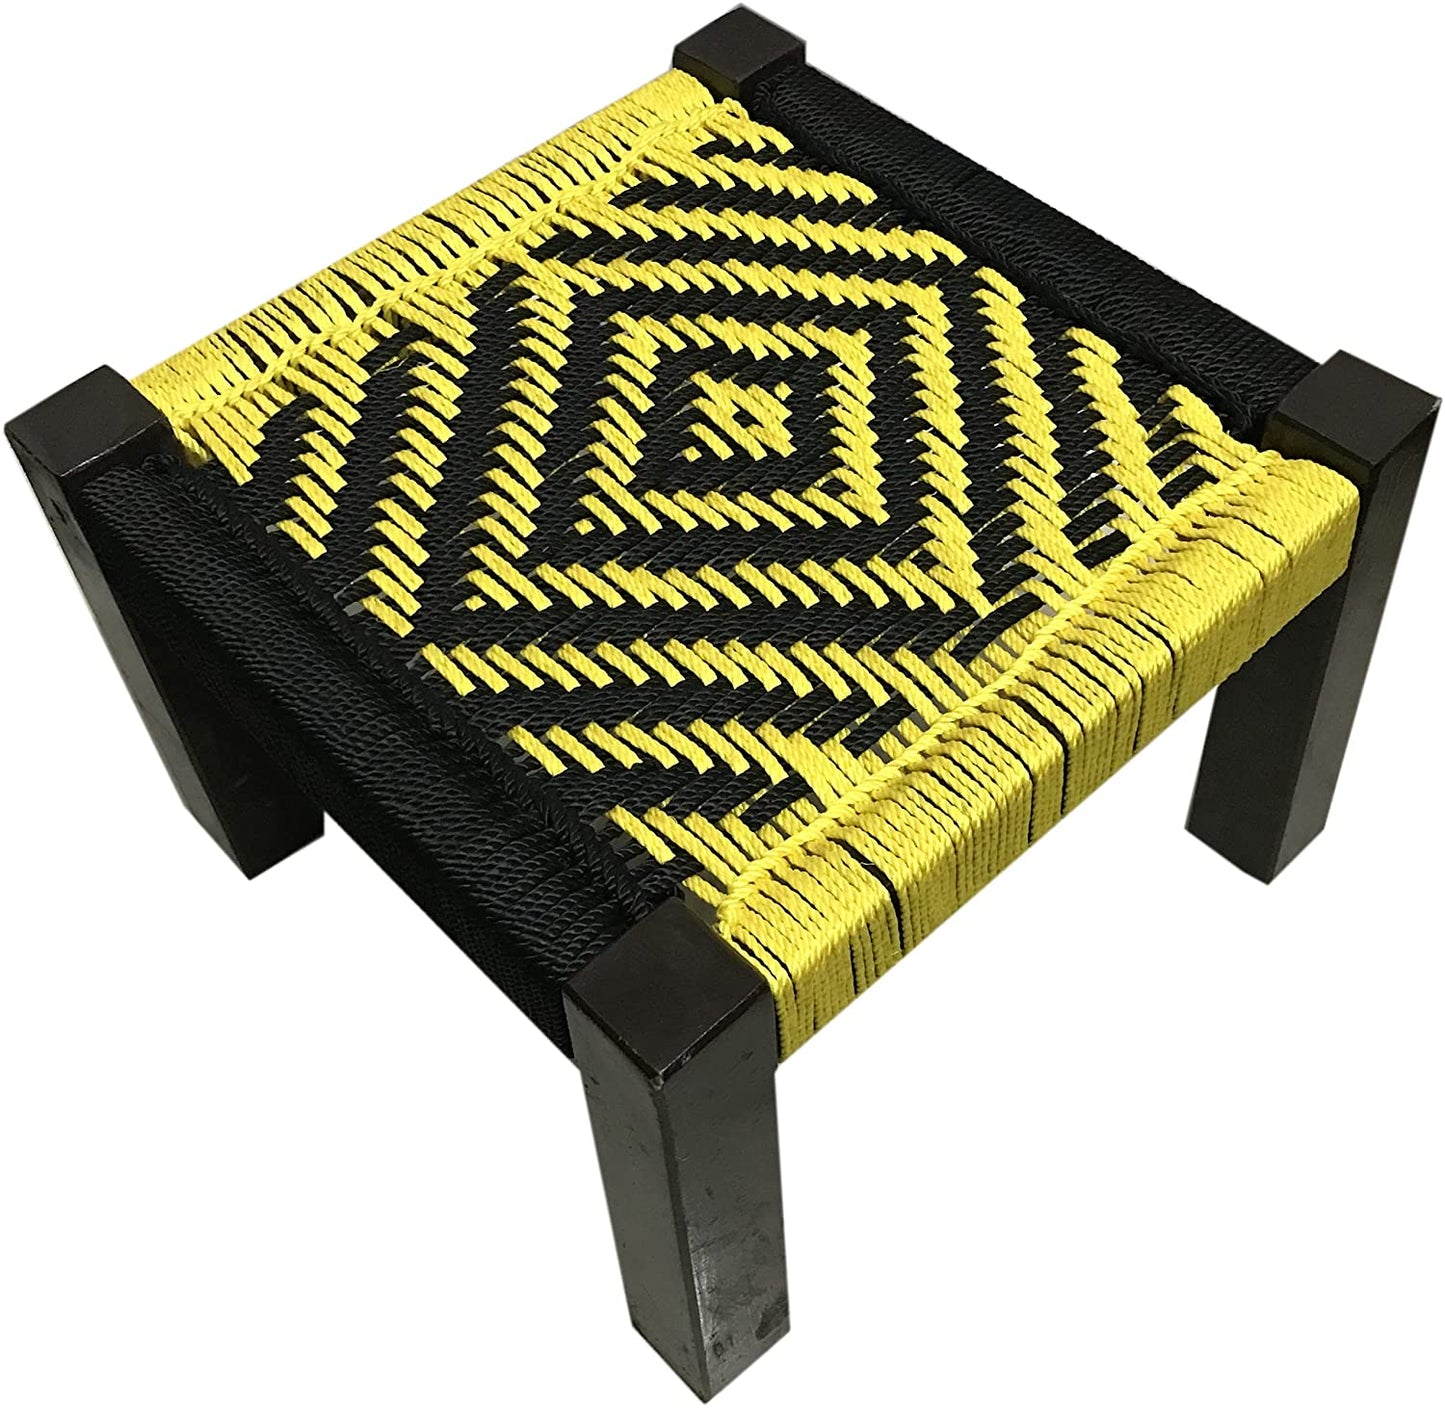 Wooden stool with yellow and black weaving for garden